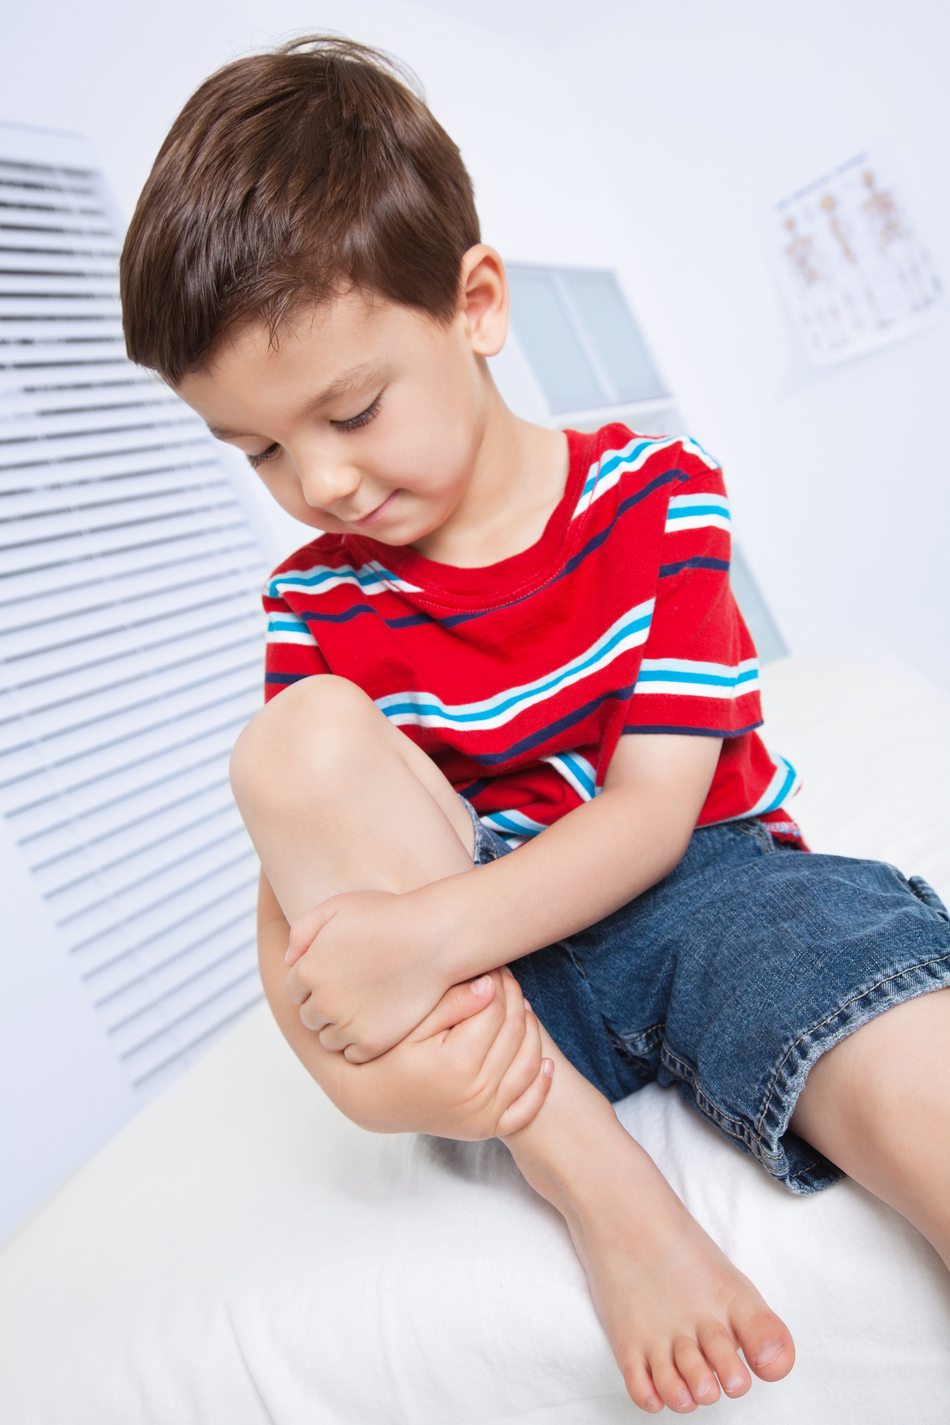 Could Your Child’s Growing Pains be Juvenile Arthritis?